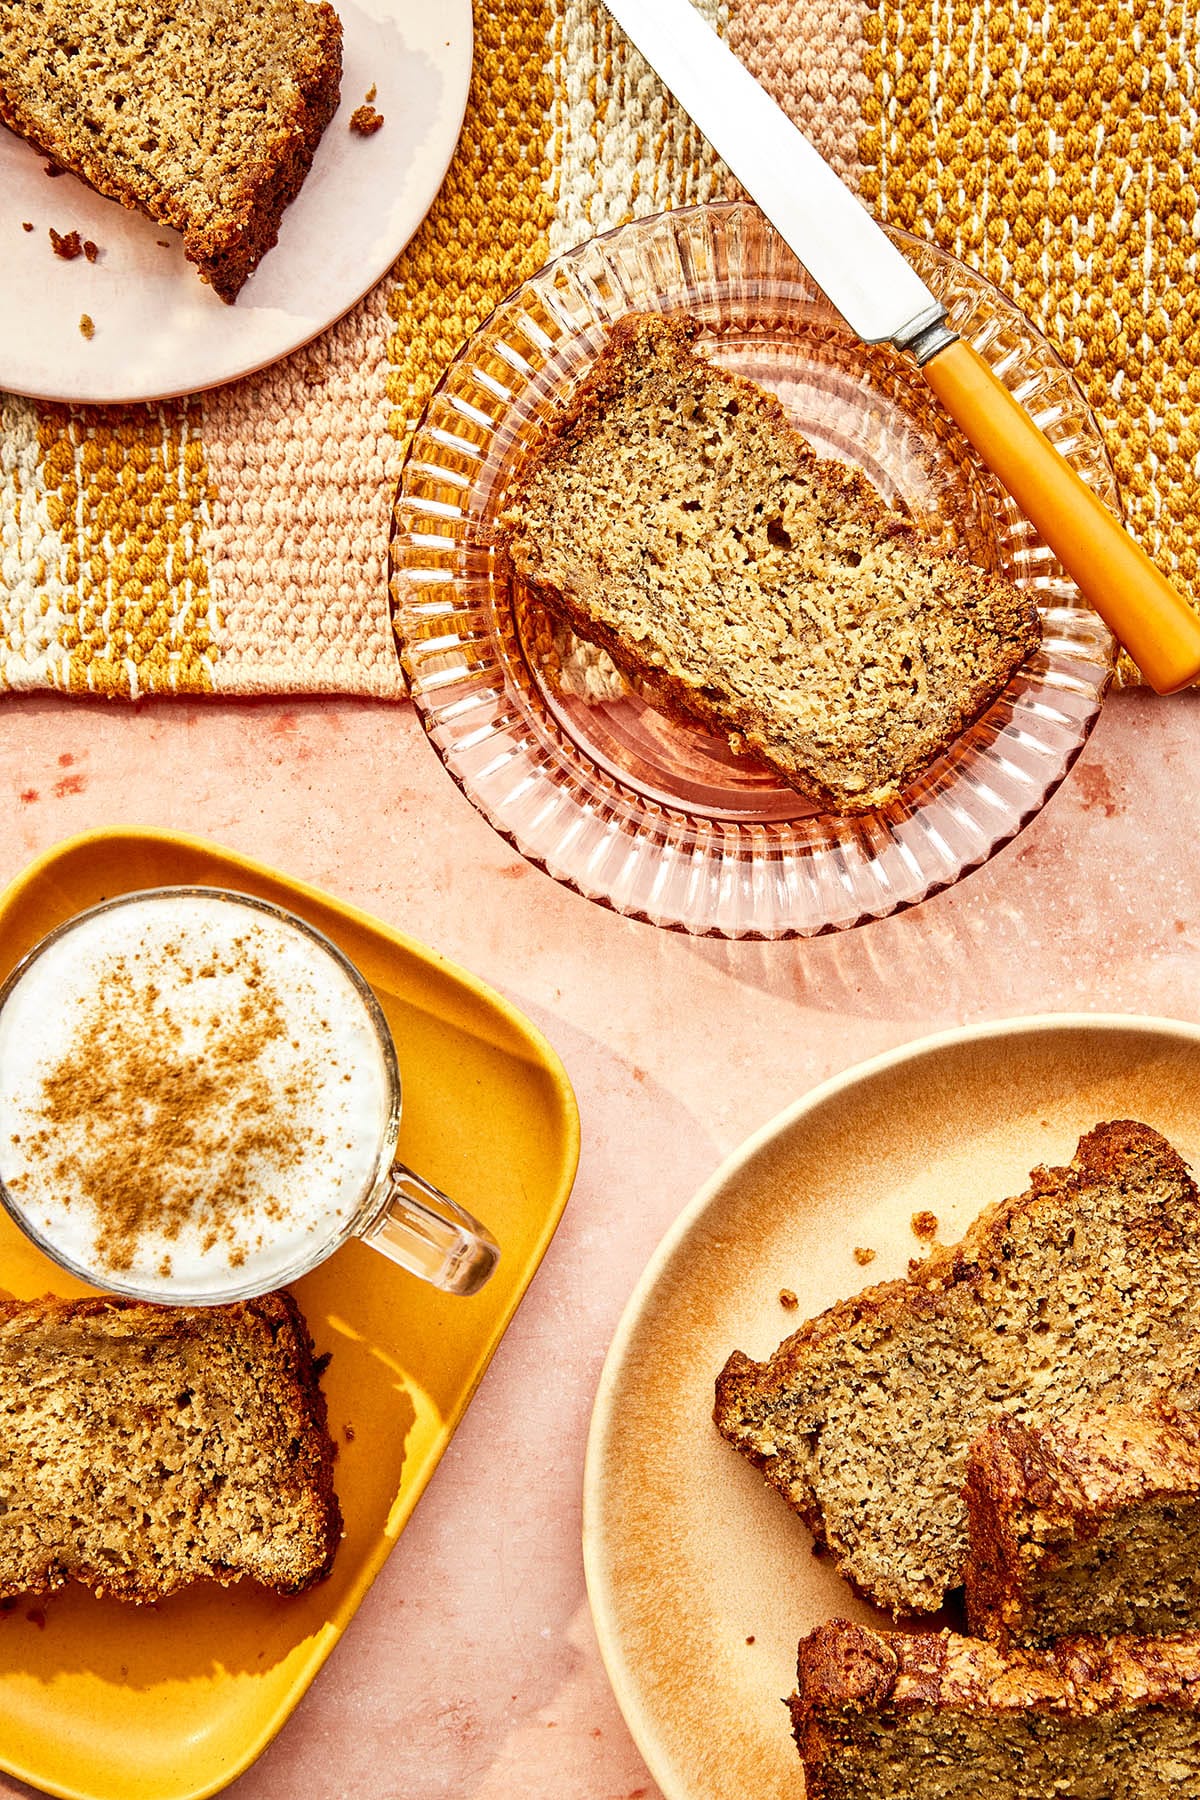 Slices of homemade quick bread on plates with a cappuccino dusted with cinnamon and a yellow-handled butter knife nearby.